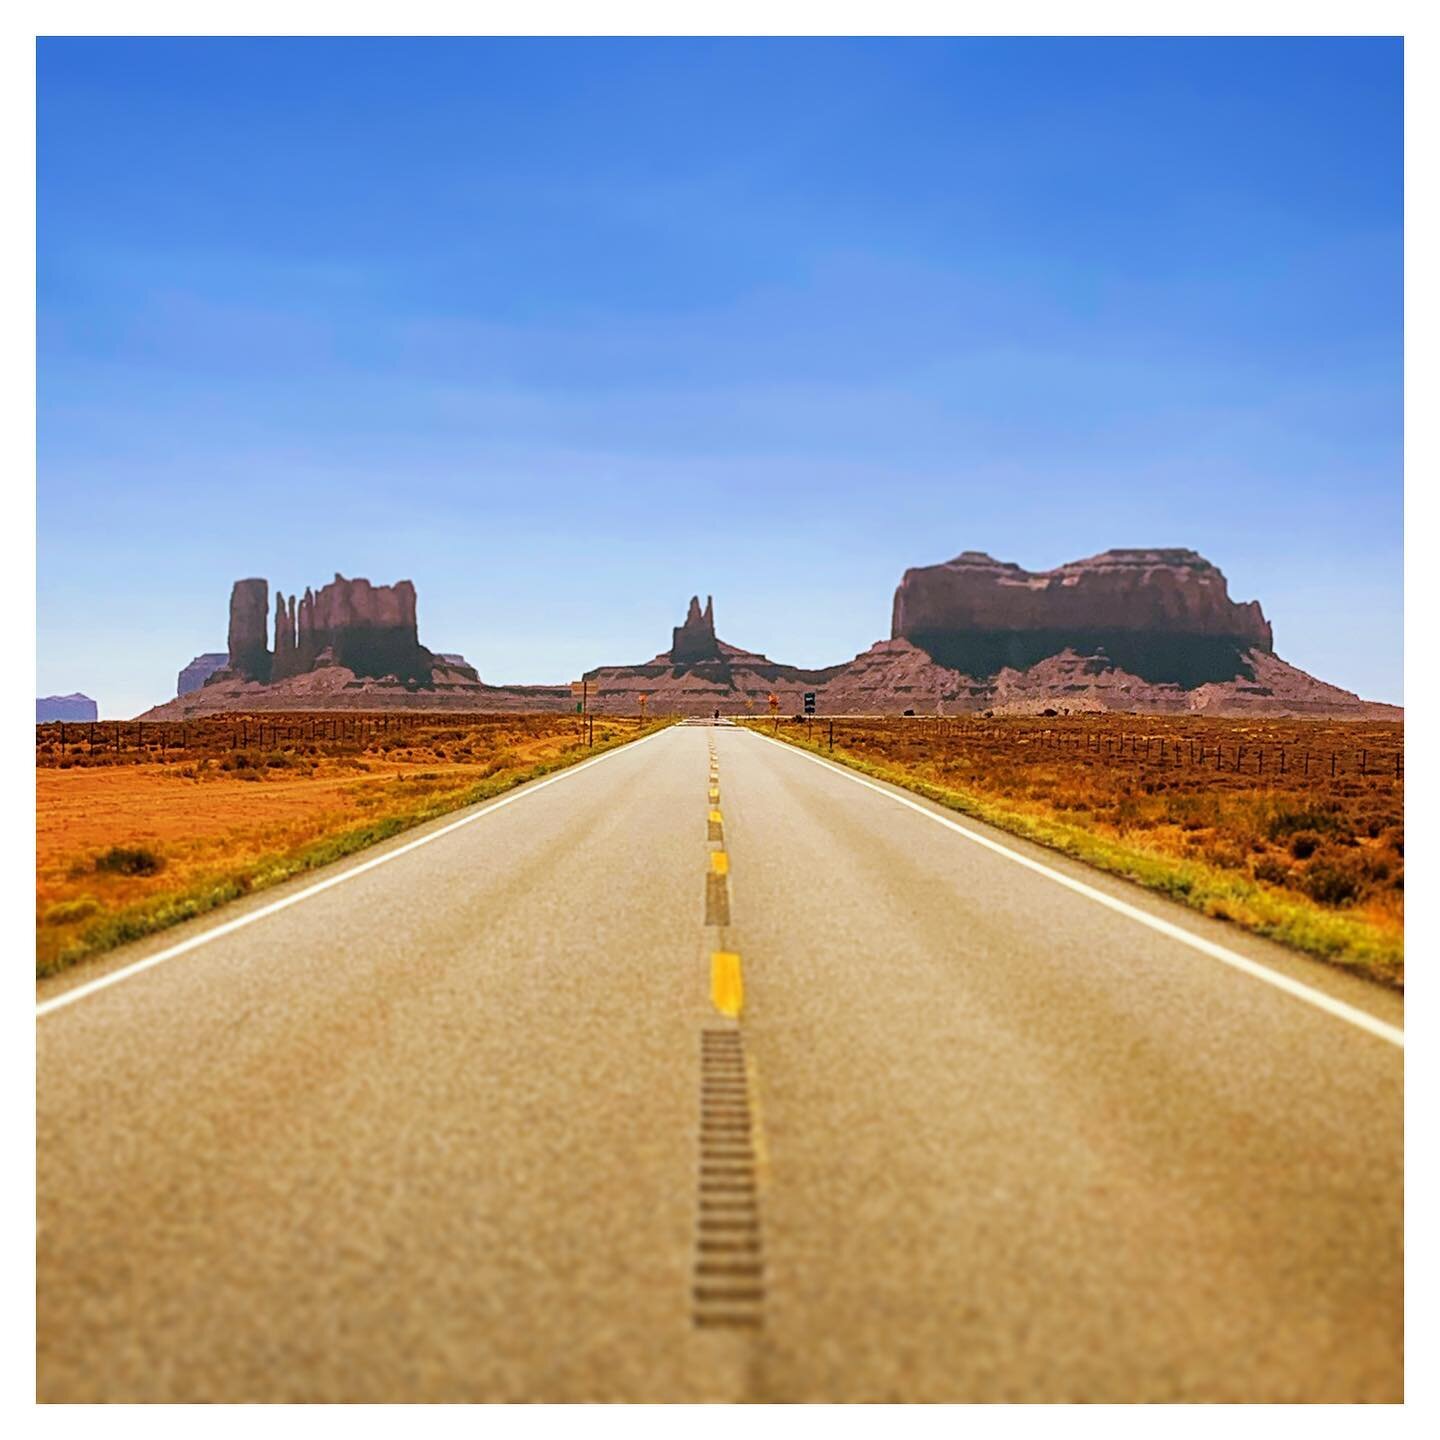 Summer is almost here! ☀️
*
Who&rsquo;s ready to get back out on the road?! 🔥
*
📍Monument Valley, Utah, USA 🇺🇸
*
*
*
#wandertheusa #roadtrip #monumentvalley #nationalpark #utah #lifeelevated #americathebeautiful #usa